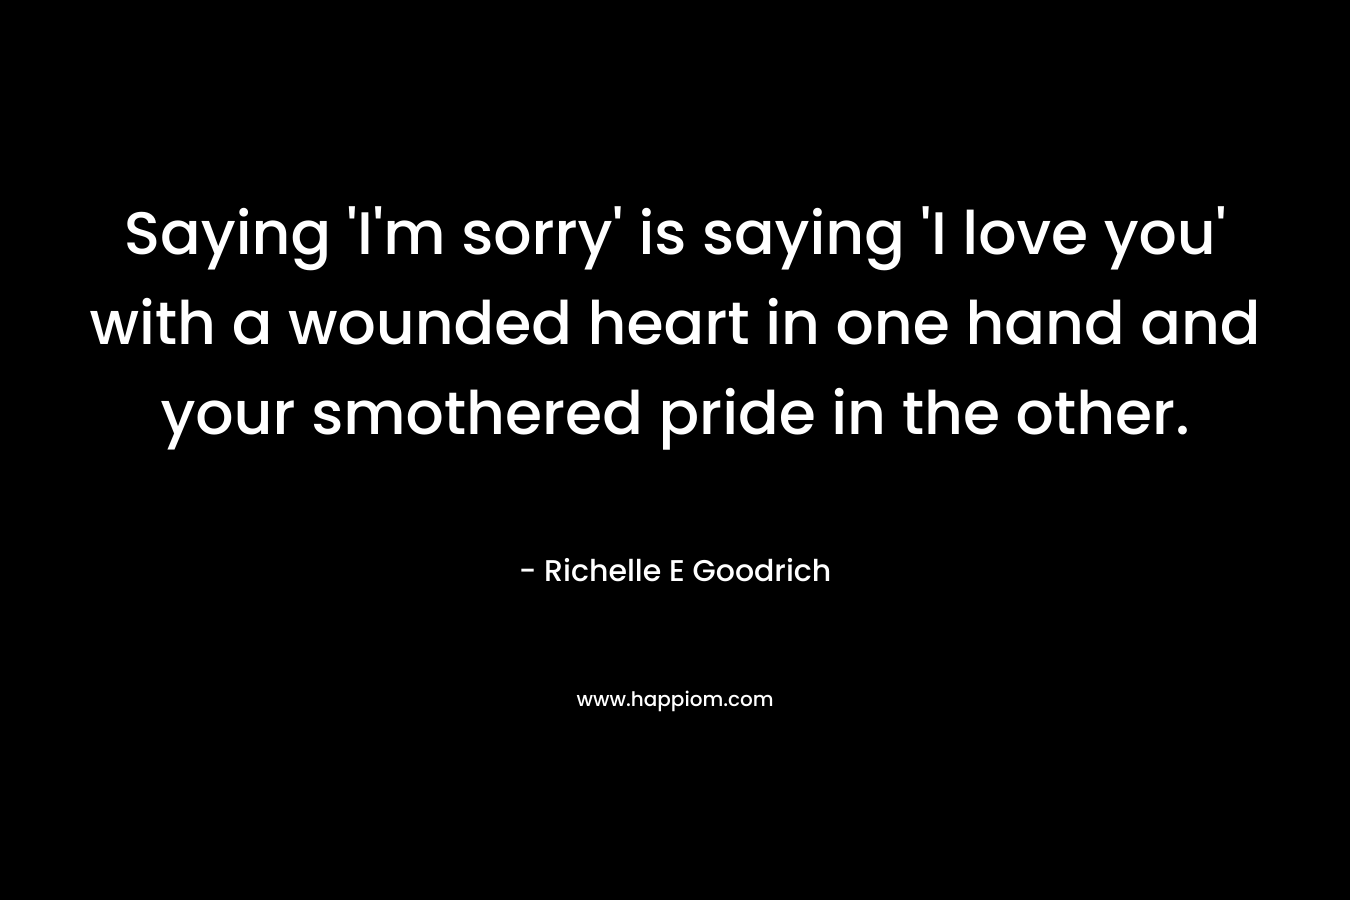 Saying ‘I’m sorry’ is saying ‘I love you’ with a wounded heart in one hand and your smothered pride in the other. – Richelle E Goodrich